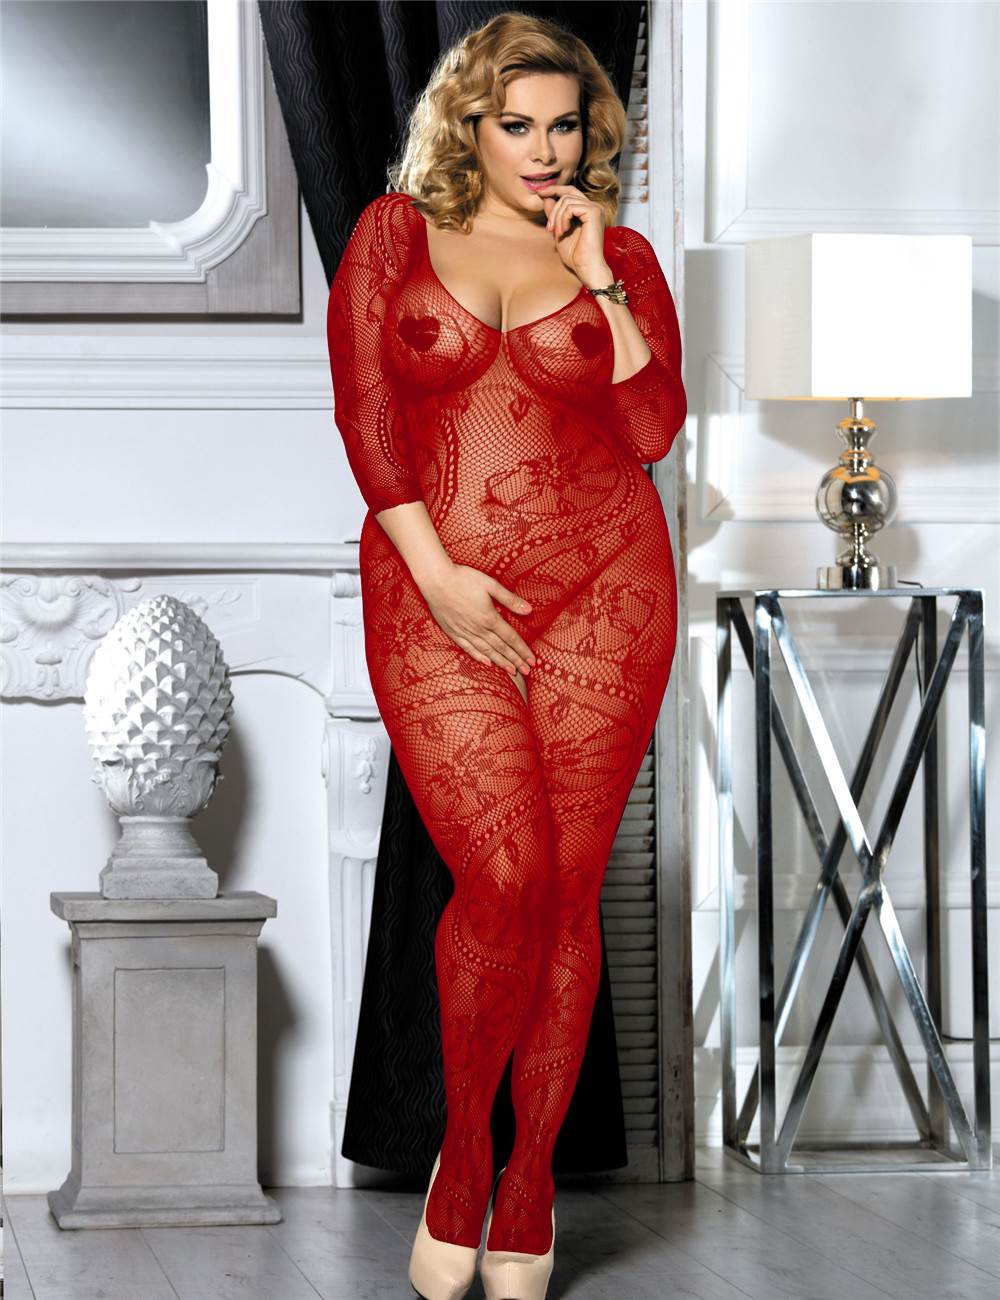 JCSTK - Unisex Lingerie Floral Swirl Bodystocking with Sleeves Red